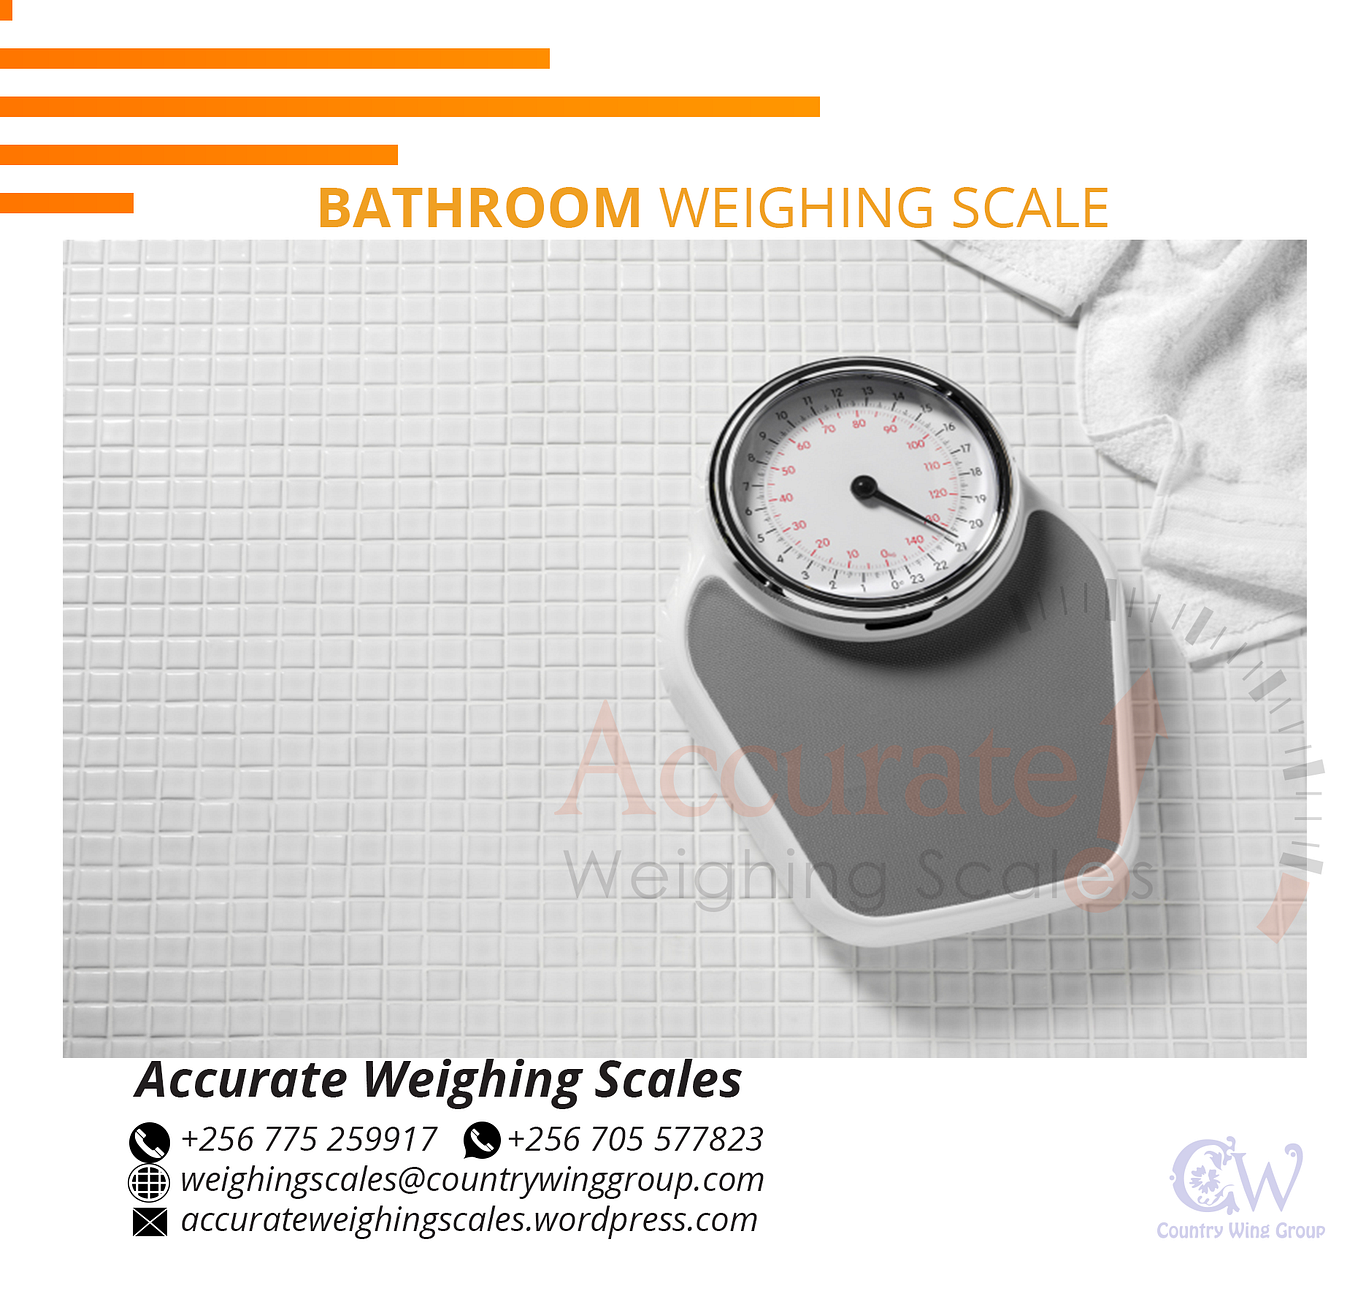 Mechanical Bathroom Scale analog measuring personal body weighing scale by  Hi Weigh Pallet Weighing Scales Supplliers Kampala Uganda - Issuu